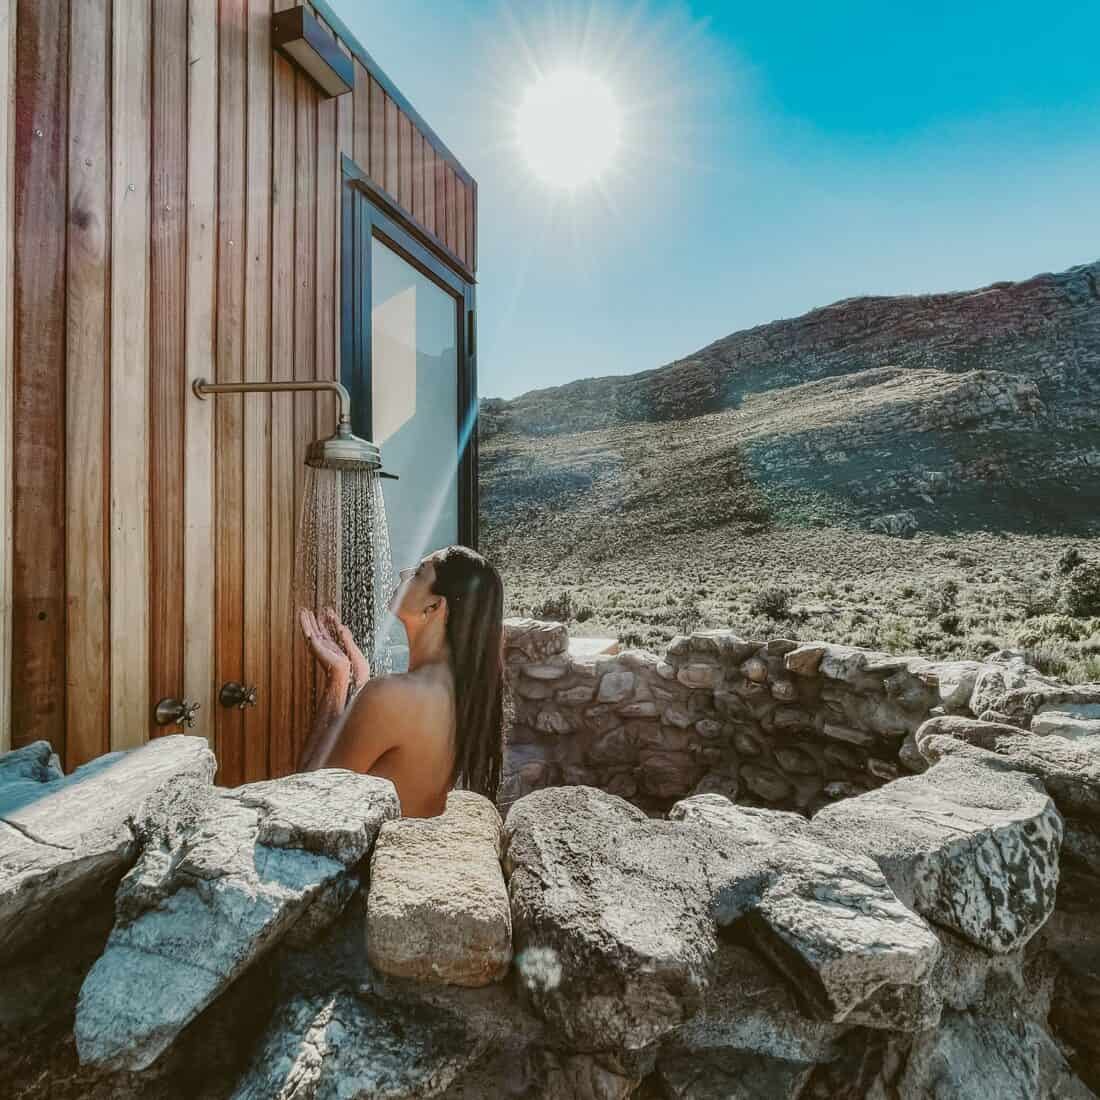 A woman enjoying a cool-off in an outdoor shower at a wooden cabin with a scenic mountain background under a clear blue sky.